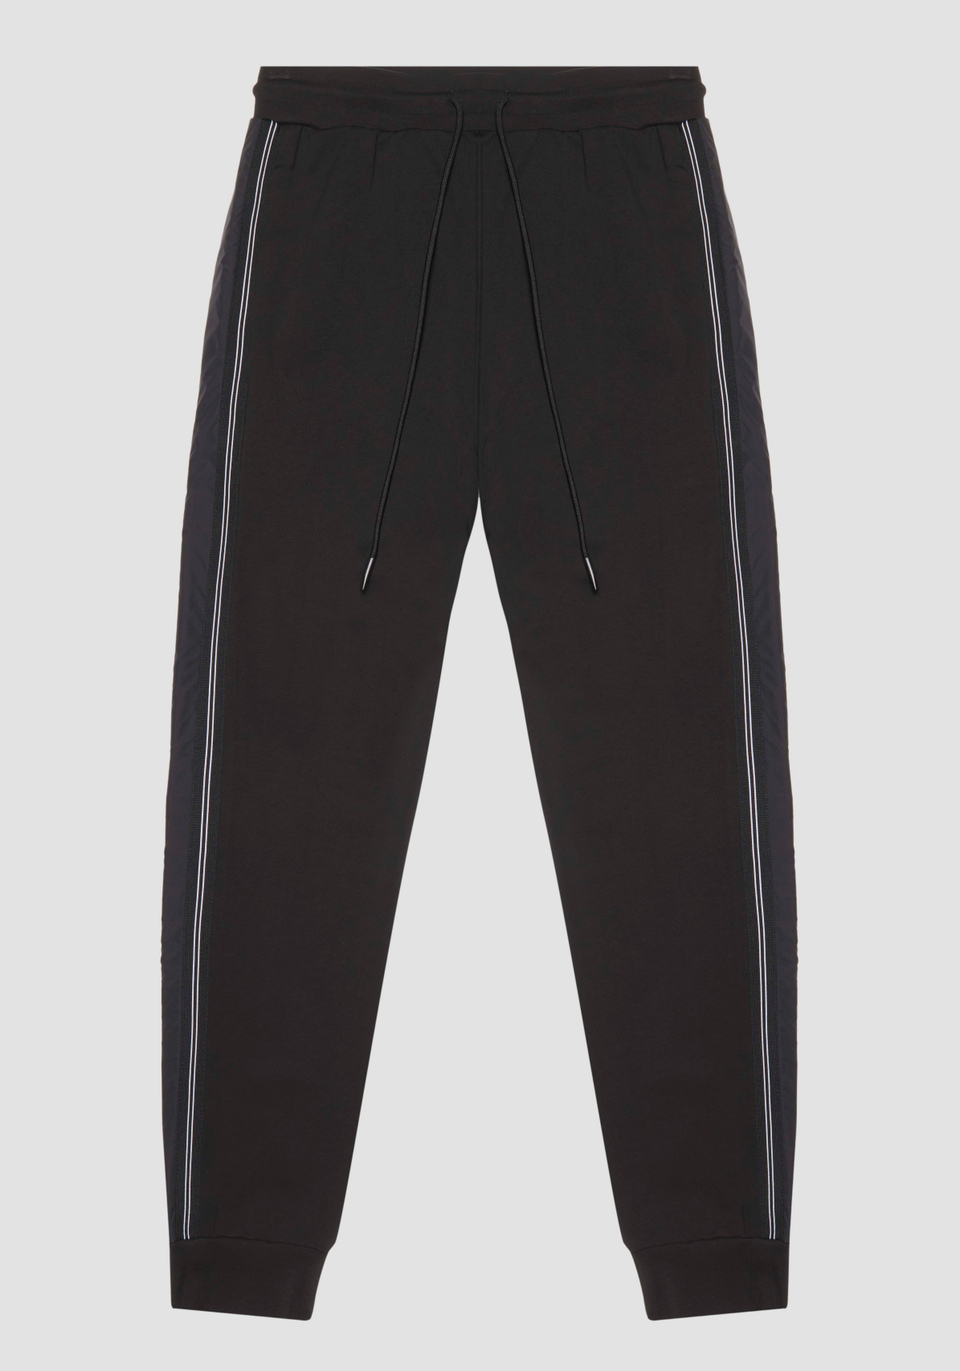 SLIM FIT SWEATPANTS IN ELASTIC COTTON WITH CONTRAST IN TECHNICAL FABRIC - Antony Morato Online Shop